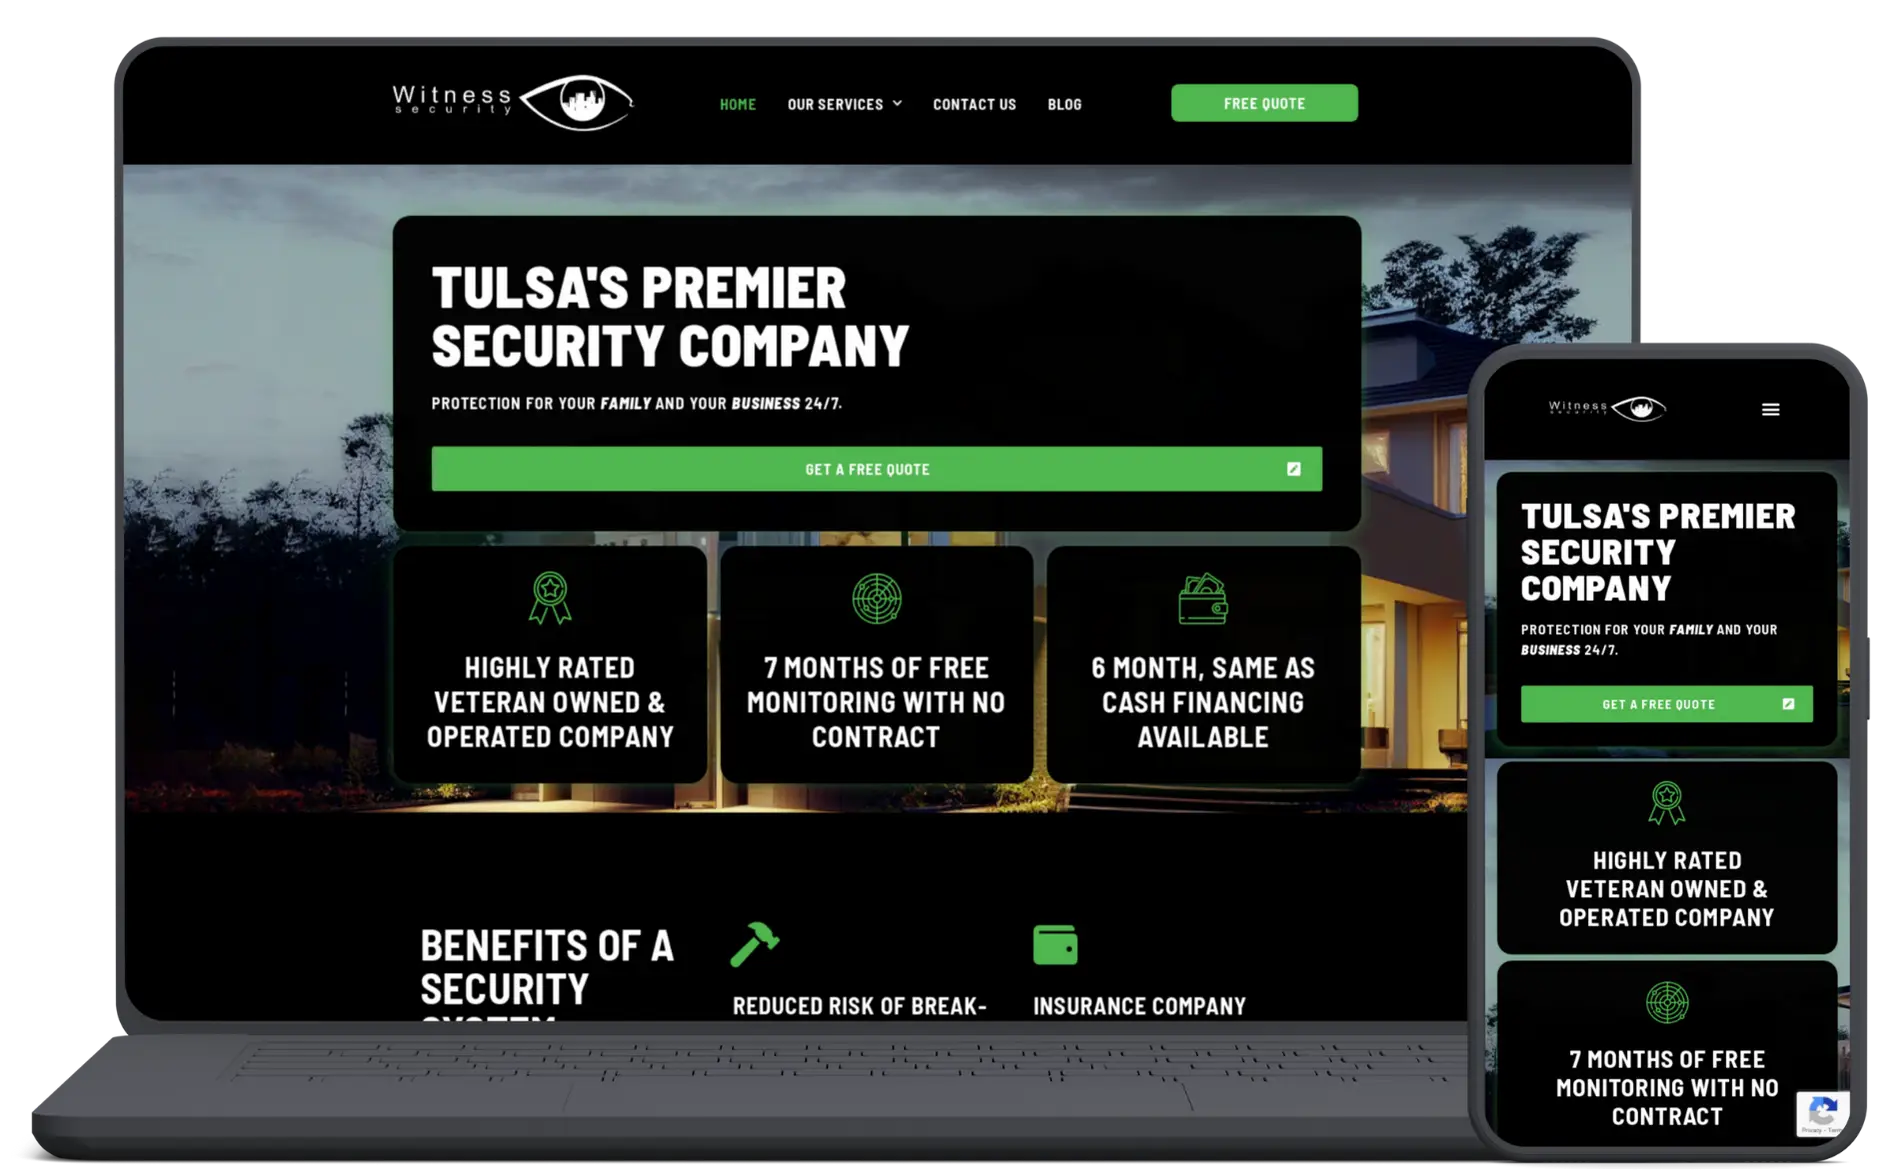 Mockup of the Witness Security Website - A Tulsa based security company